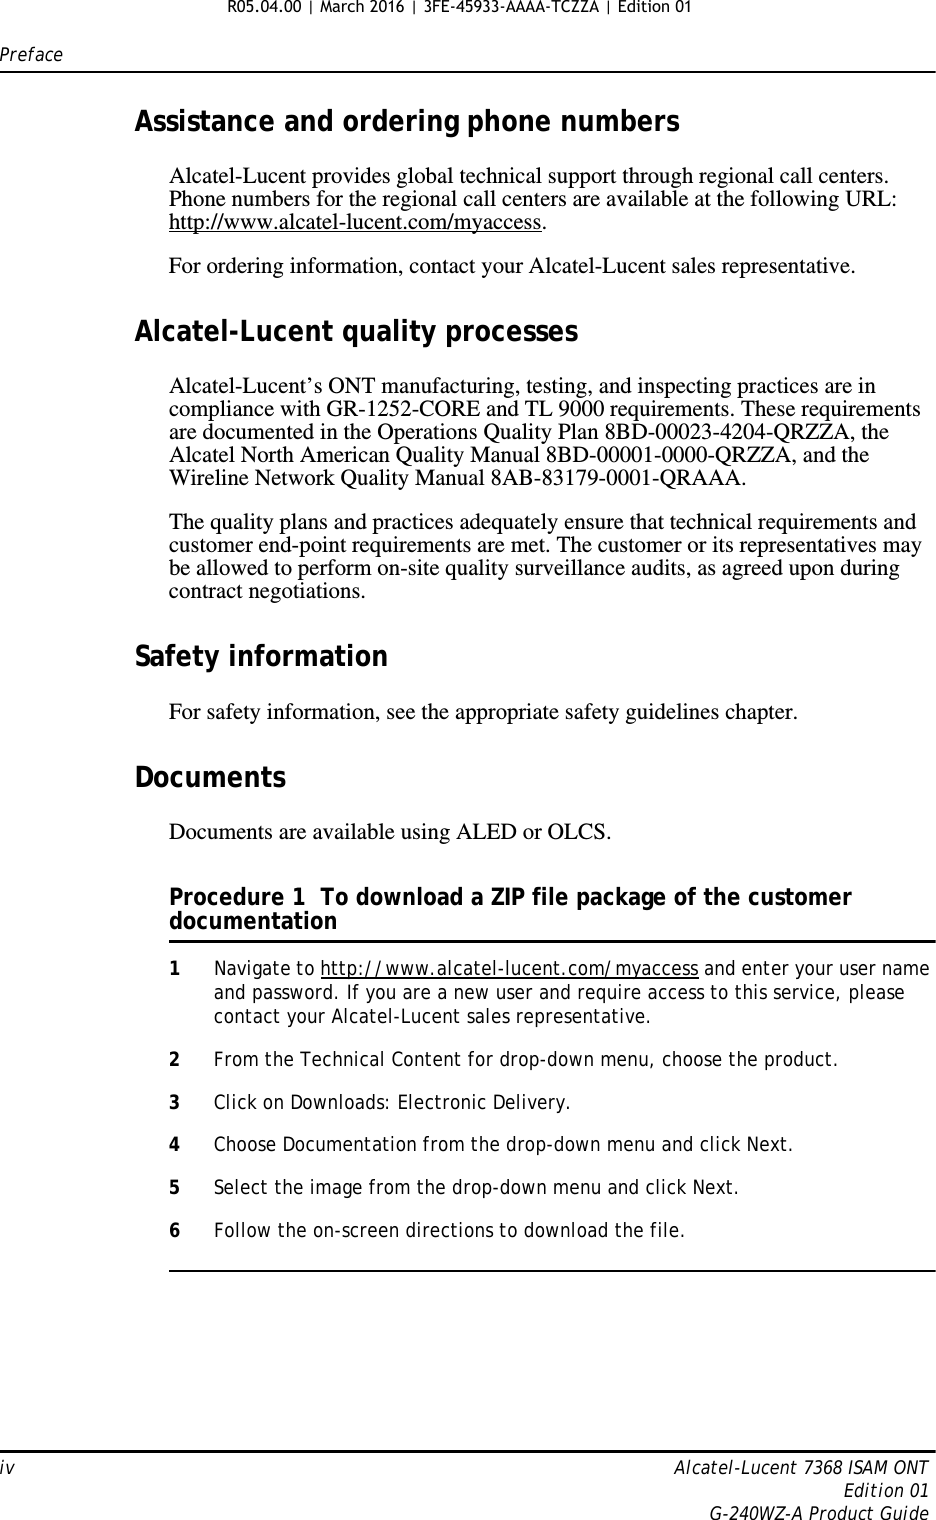 Prefaceiv Alcatel-Lucent 7368 ISAM ONTEdition 01G-240WZ-A Product GuideAssistance and ordering phone numbersAlcatel-Lucent provides global technical support through regional call centers. Phone numbers for the regional call centers are available at the following URL: http://www.alcatel-lucent.com/myaccess. For ordering information, contact your Alcatel-Lucent sales representative.Alcatel-Lucent quality processesAlcatel-Lucent’s ONT manufacturing, testing, and inspecting practices are in compliance with GR-1252-CORE and TL 9000 requirements. These requirements are documented in the Operations Quality Plan 8BD-00023-4204-QRZZA, the Alcatel North American Quality Manual 8BD-00001-0000-QRZZA, and the Wireline Network Quality Manual 8AB-83179-0001-QRAAA.The quality plans and practices adequately ensure that technical requirements and customer end-point requirements are met. The customer or its representatives may be allowed to perform on-site quality surveillance audits, as agreed upon during contract negotiations.Safety informationFor safety information, see the appropriate safety guidelines chapter.DocumentsDocuments are available using ALED or OLCS.Procedure 1  To download a ZIP file package of the customer documentation1Navigate to http://www.alcatel-lucent.com/myaccess and enter your user name and password. If you are a new user and require access to this service, please contact your Alcatel-Lucent sales representative.2From the Technical Content for drop-down menu, choose the product.3Click on Downloads: Electronic Delivery.4Choose Documentation from the drop-down menu and click Next.5Select the image from the drop-down menu and click Next.6Follow the on-screen directions to download the file.R05.04.00 | March 2016 | 3FE-45933-AAAA-TCZZA | Edition 01 